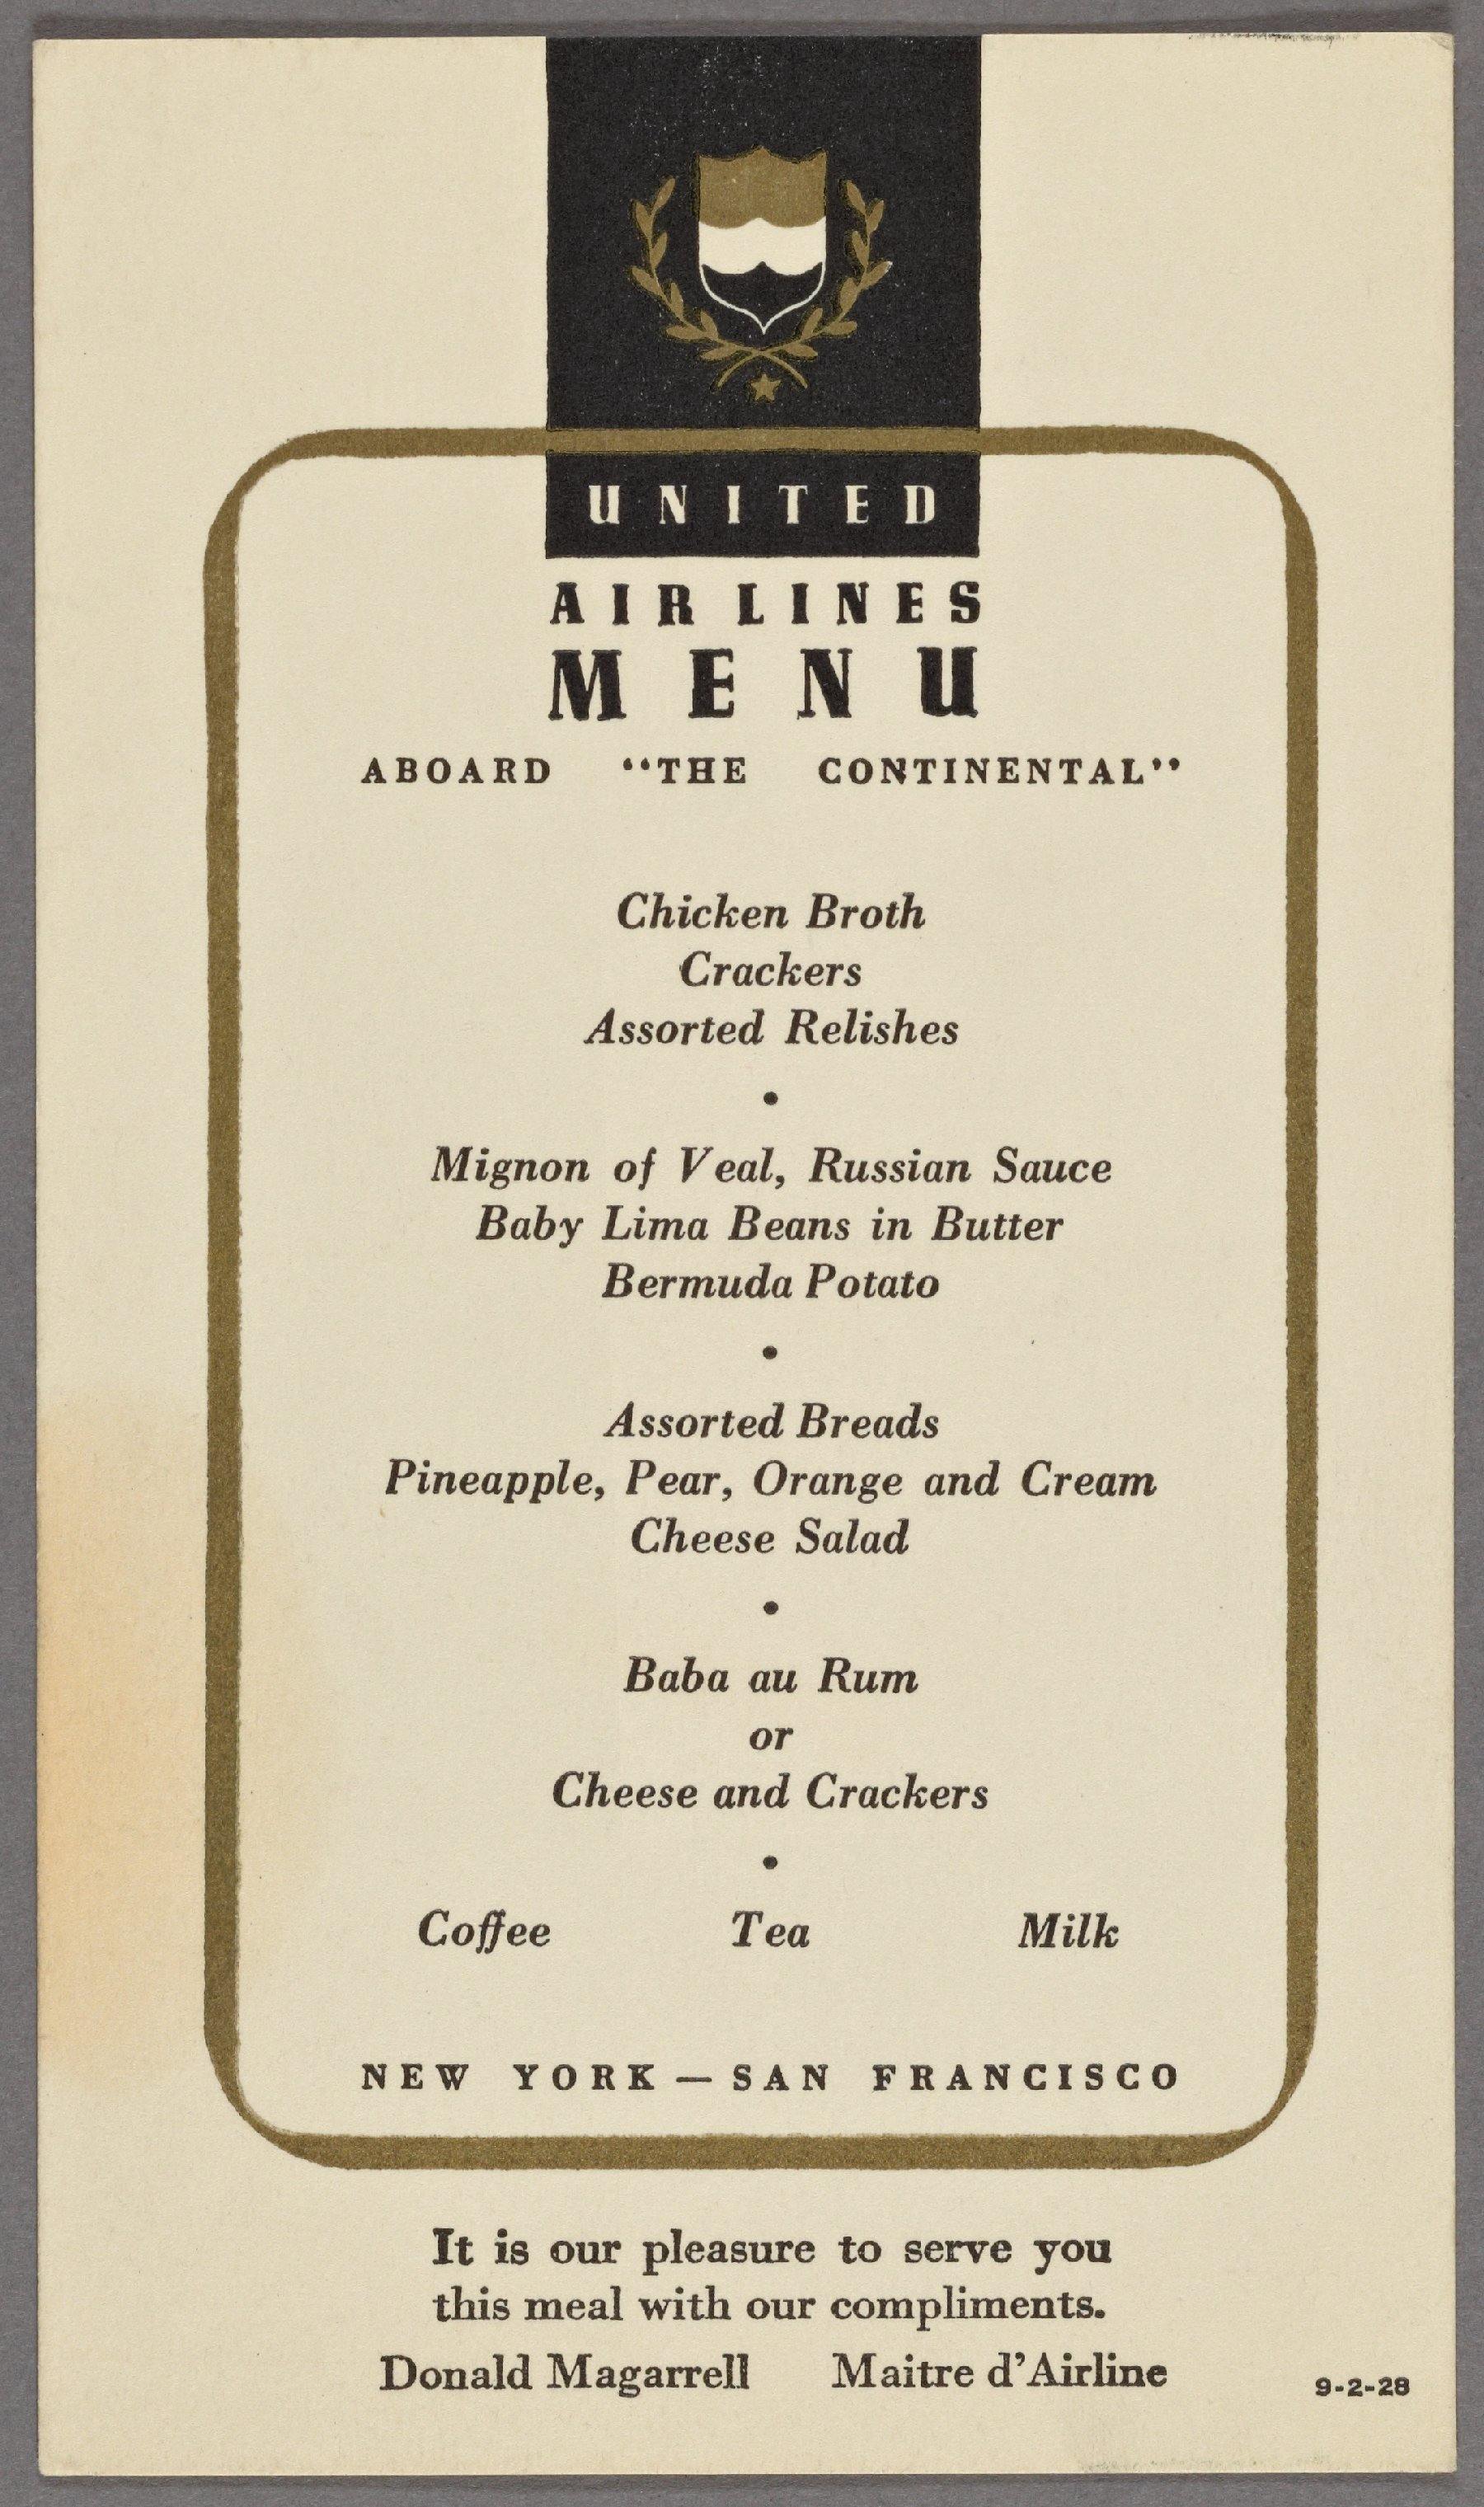 United Airlines from 1929.